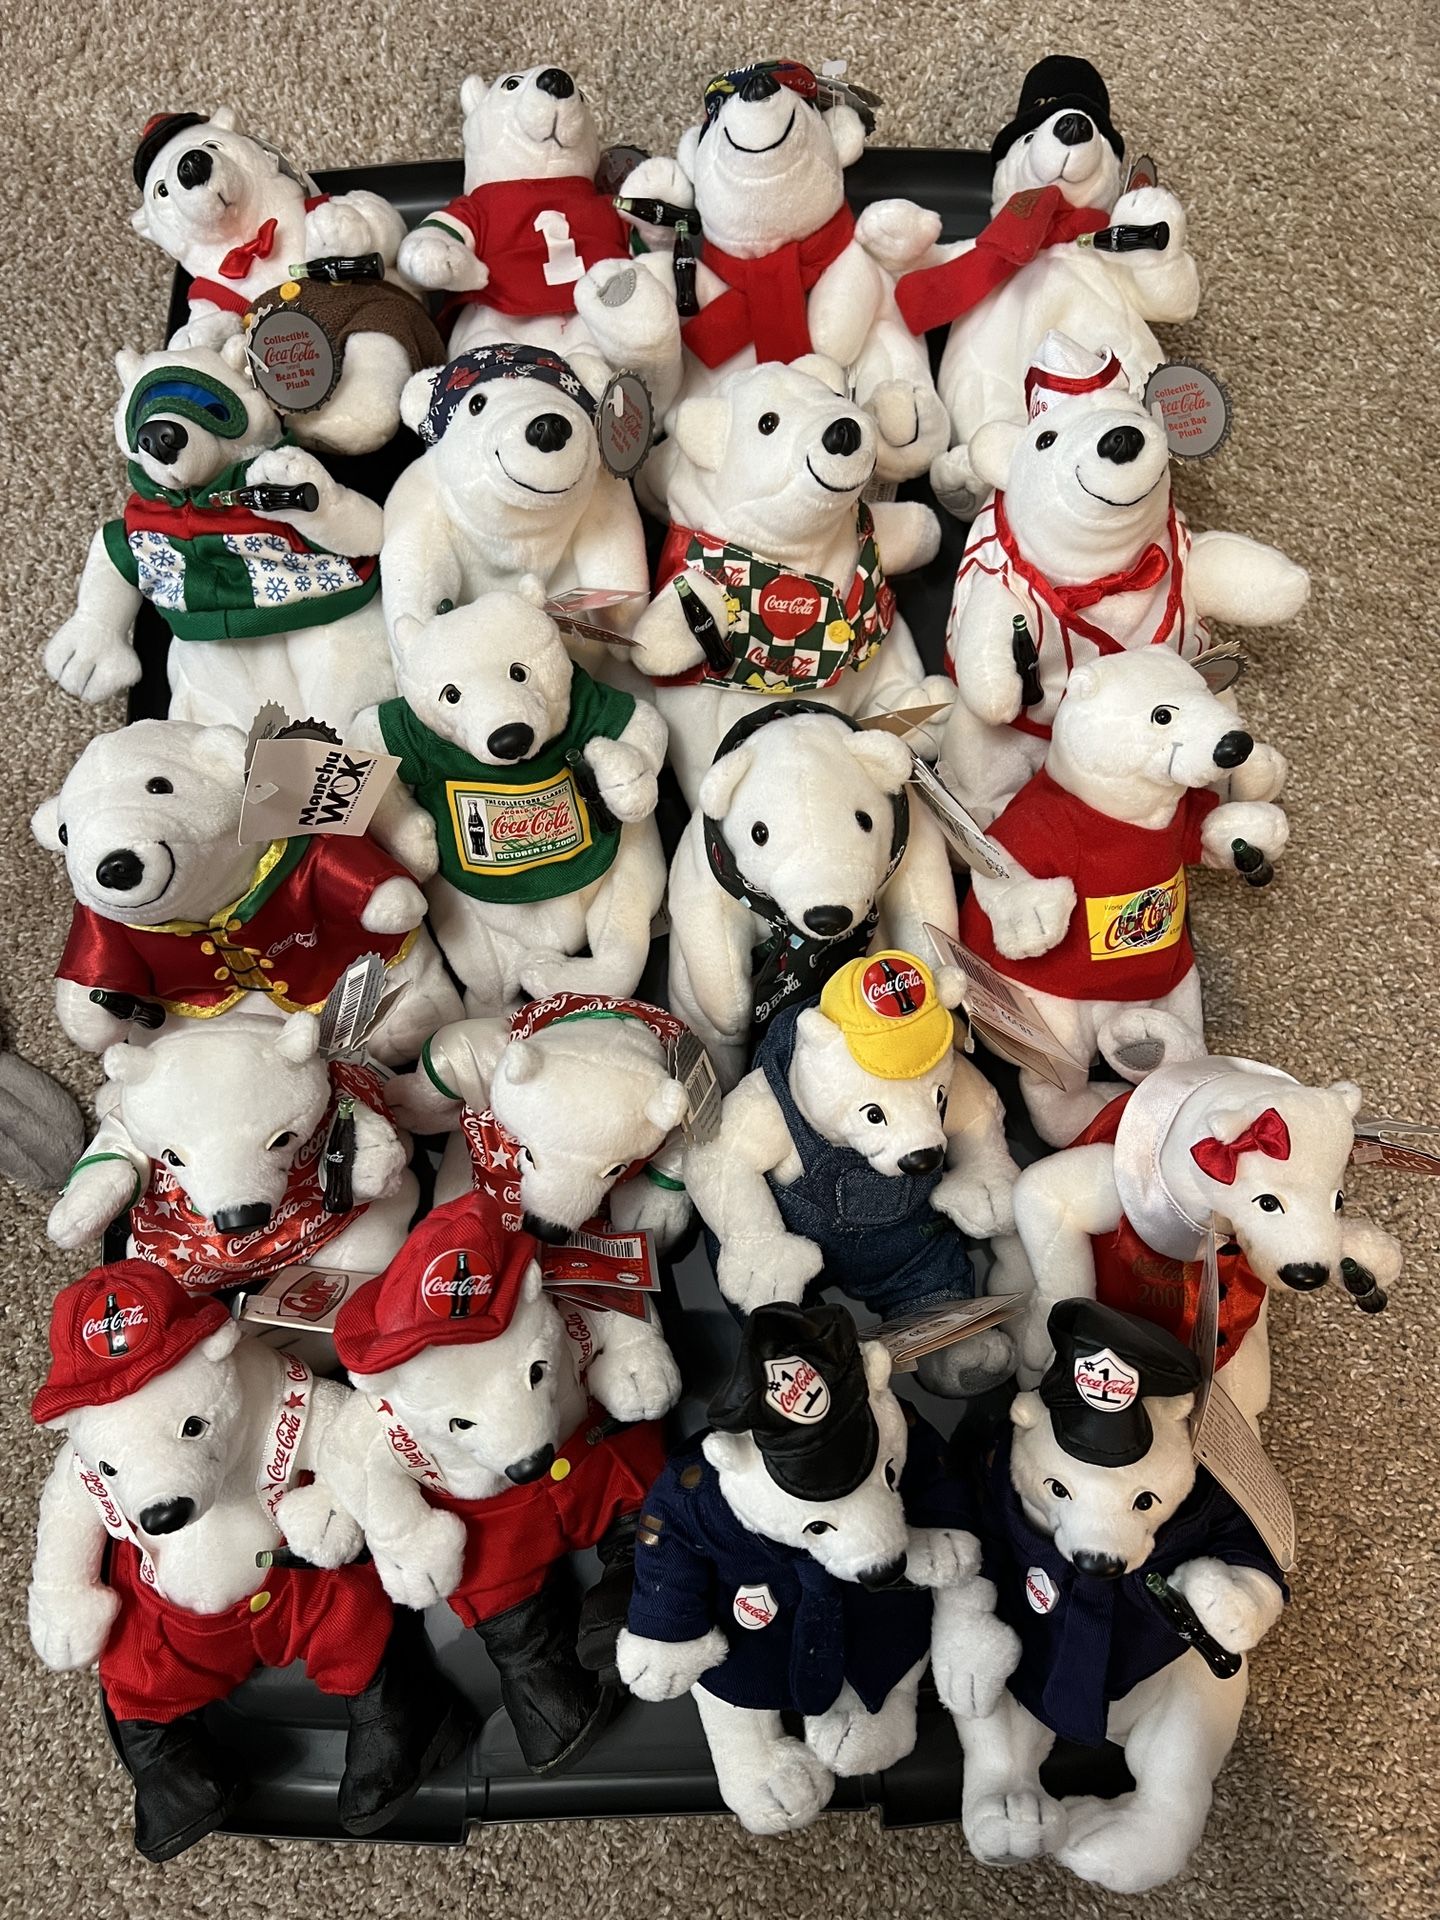 Coca Cola Plush Toys - $3 each or best offer.